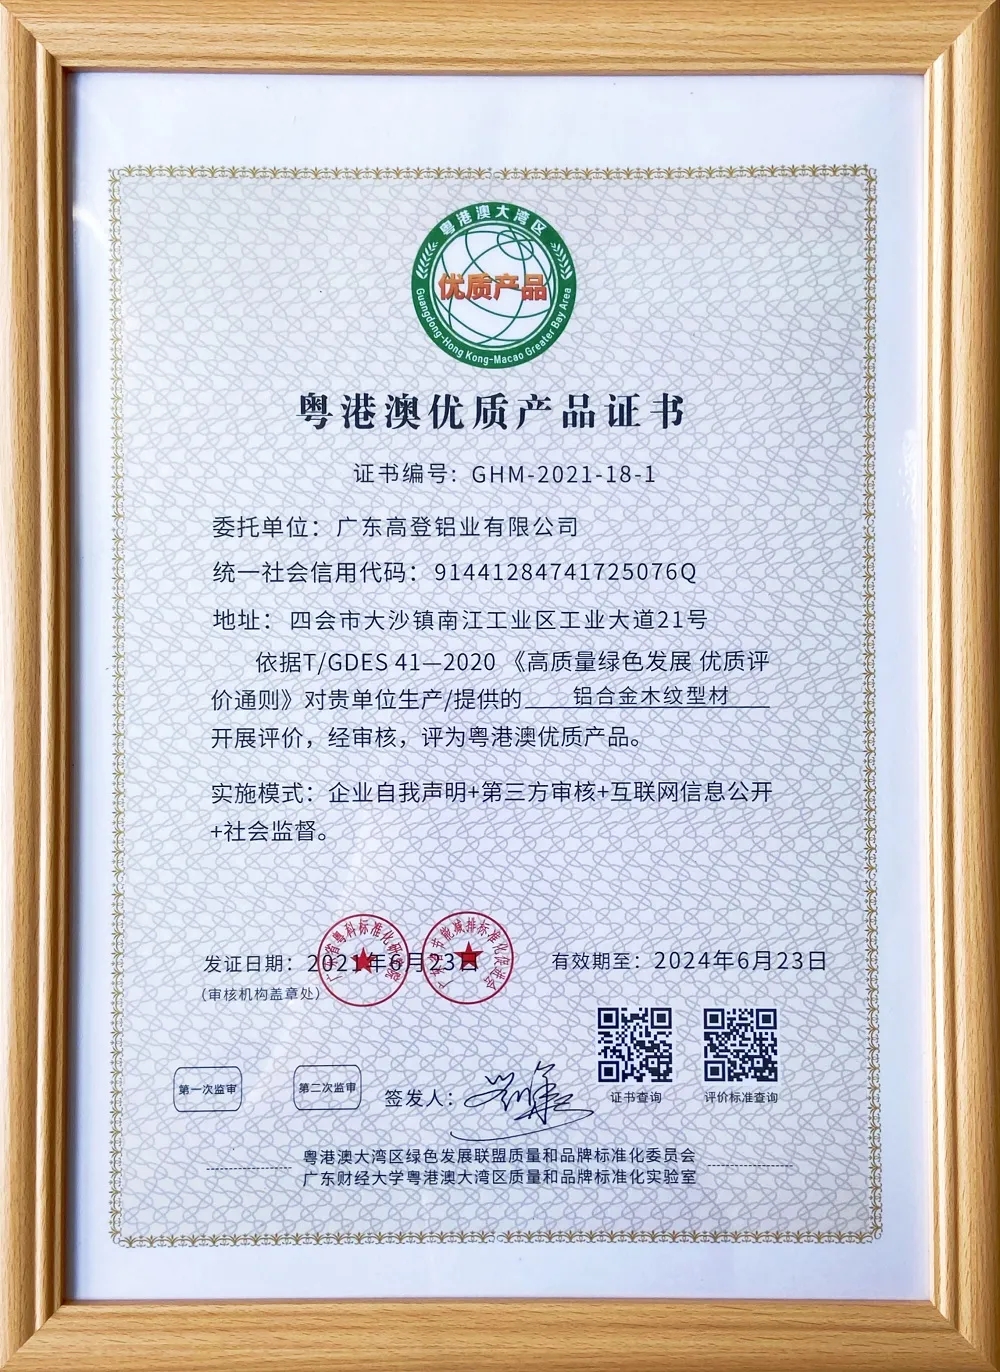 Gordon aluminum has a new identity and sells well in Guangdong, Hong Kong and Macao!